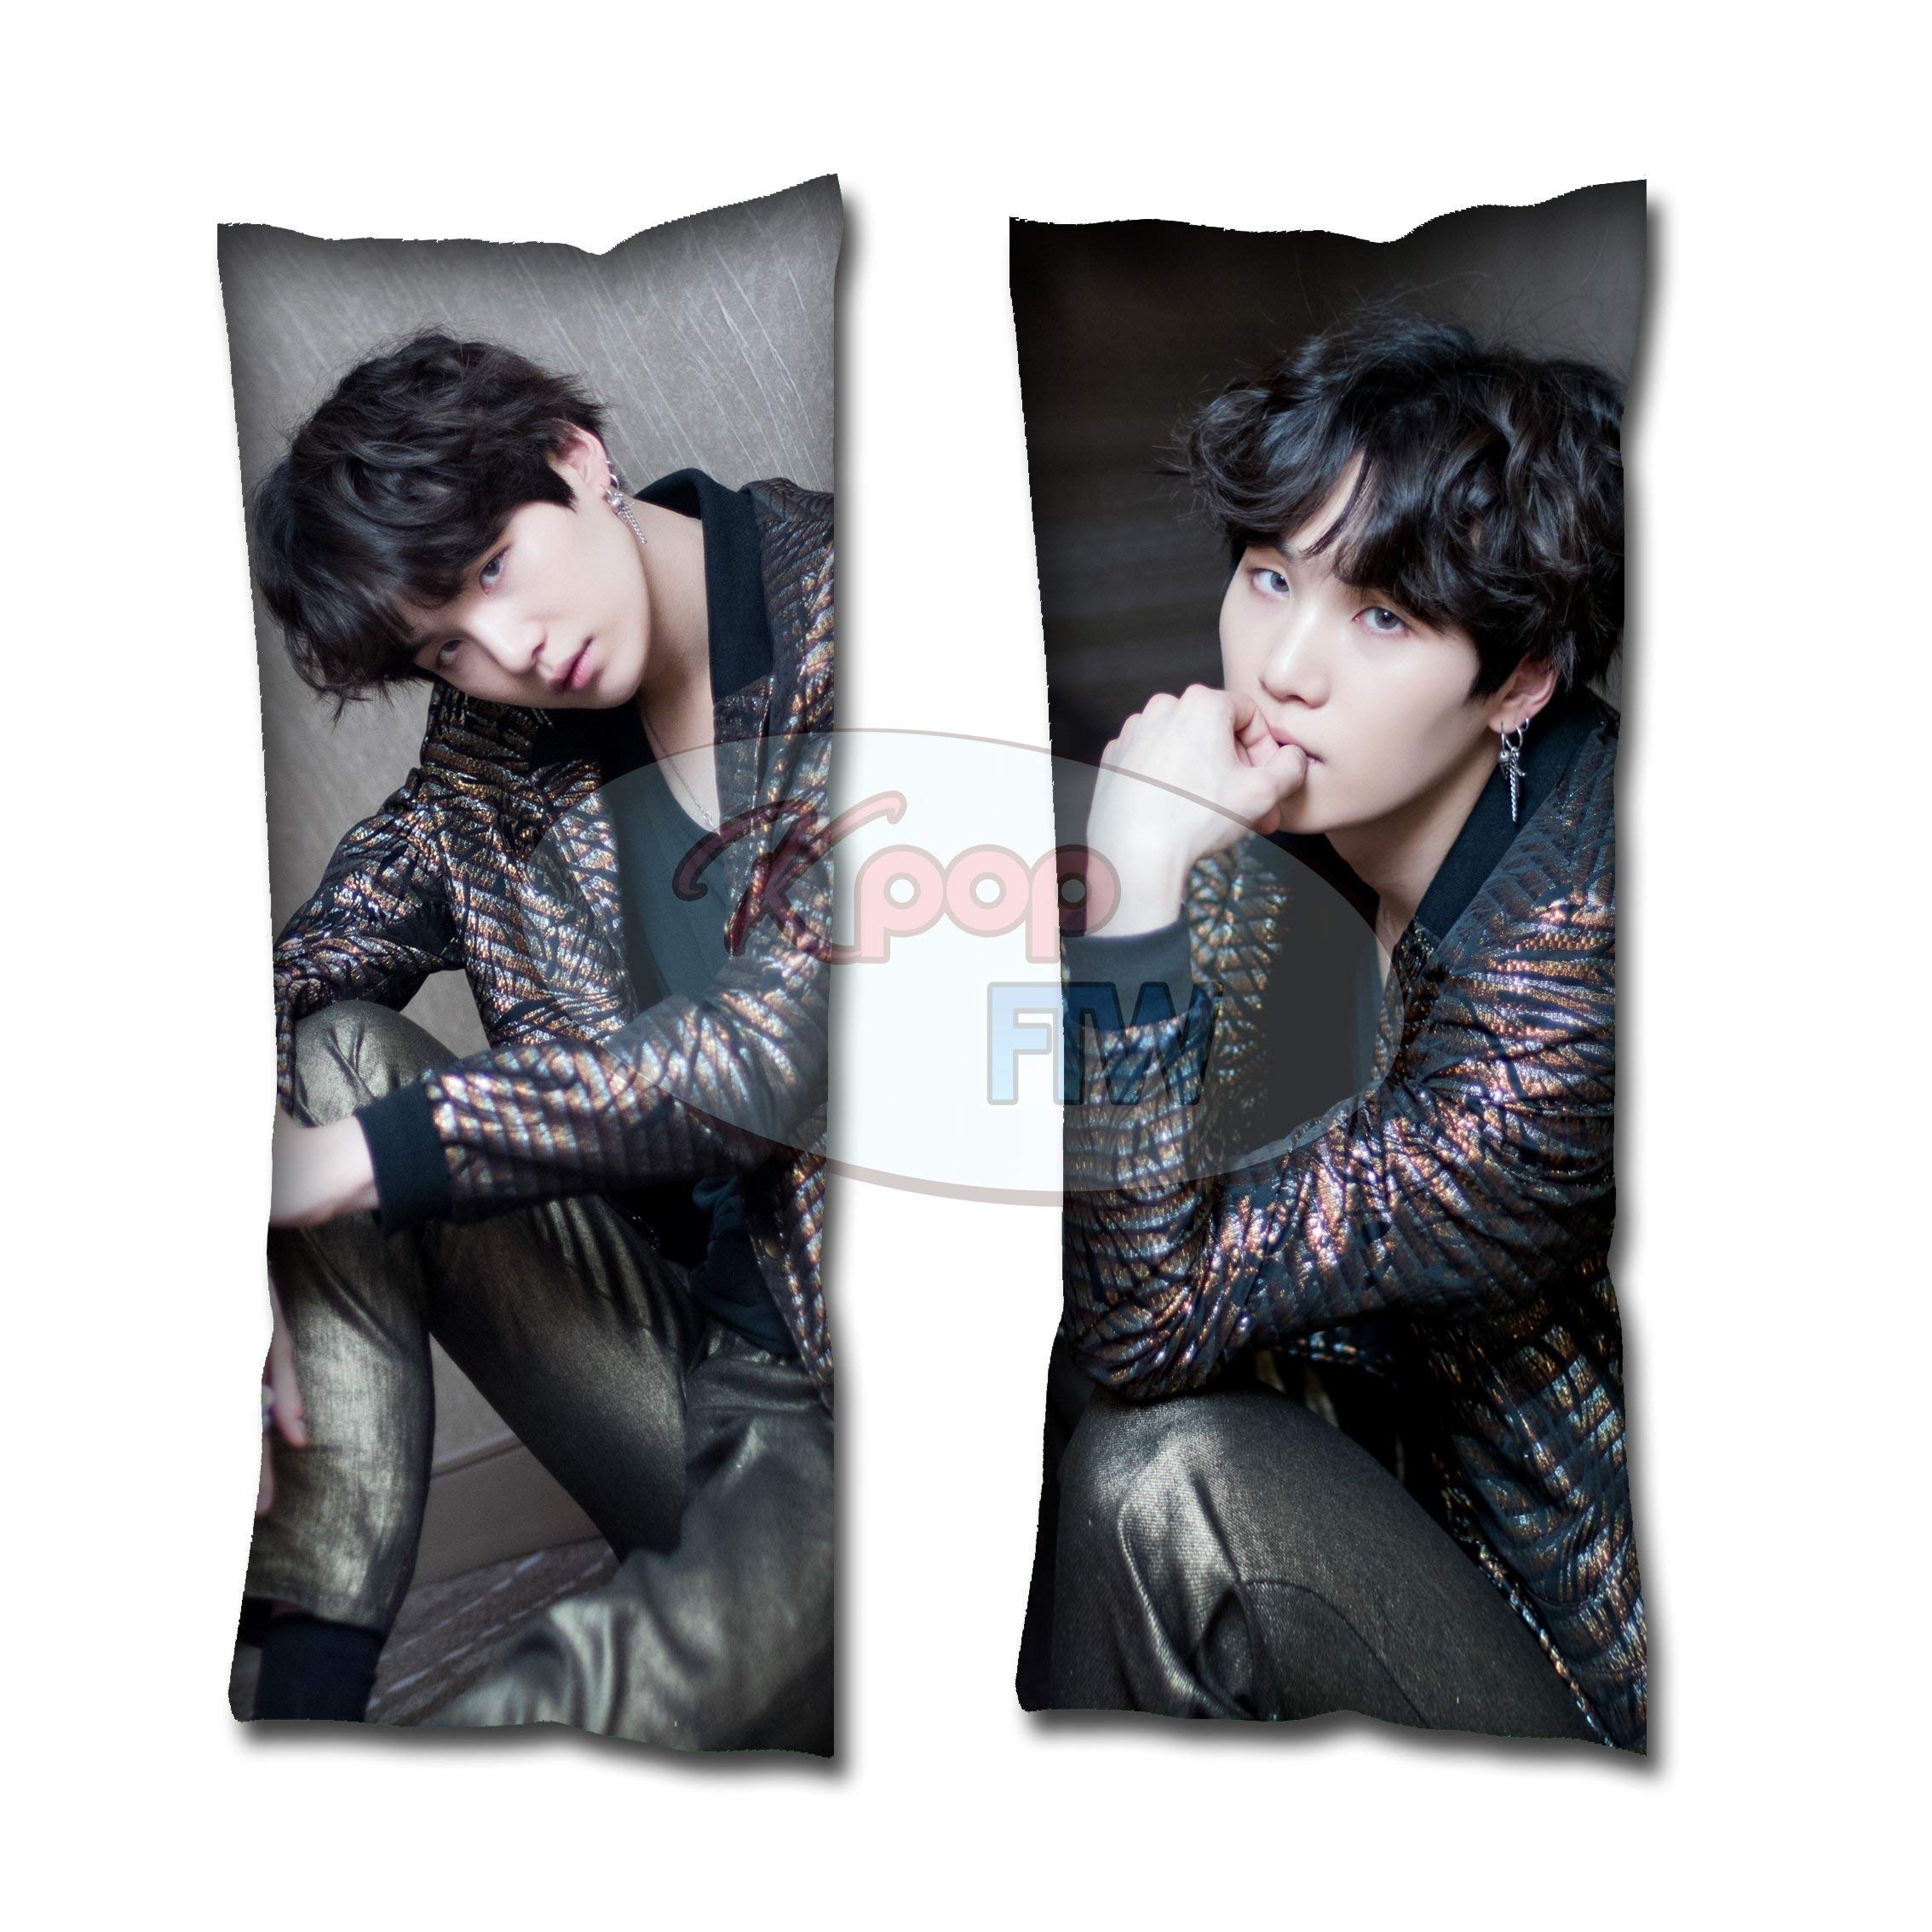 Cosplay-FTW Kpop BTS BMA Suga Body Pillow Cover Peach Skin Cotton Polyester Blend 40cm x 100cm (Set of 1, CASE ONLY)